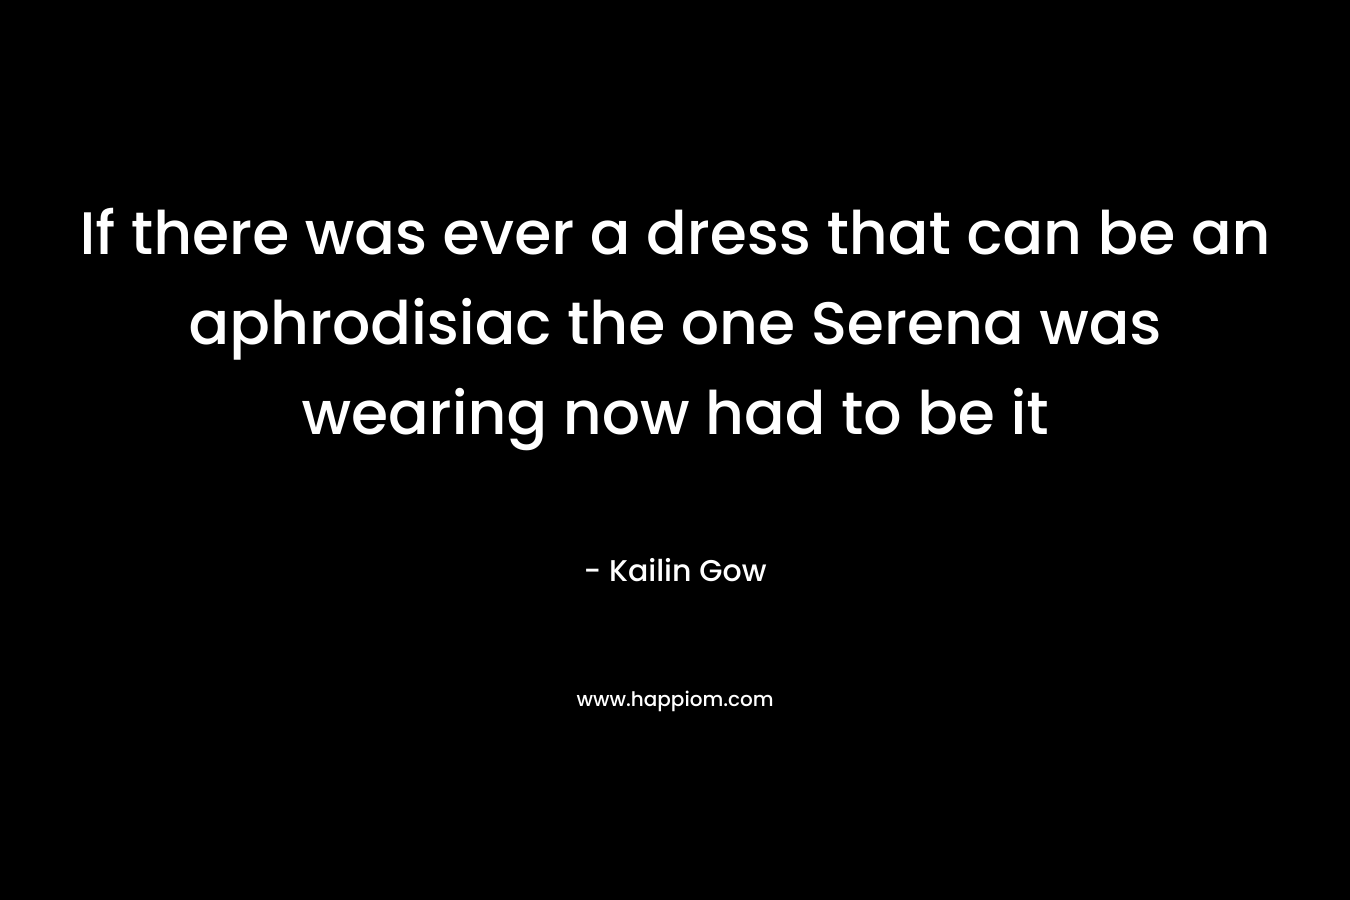 If there was ever a dress that can be an aphrodisiac the one Serena was wearing now had to be it